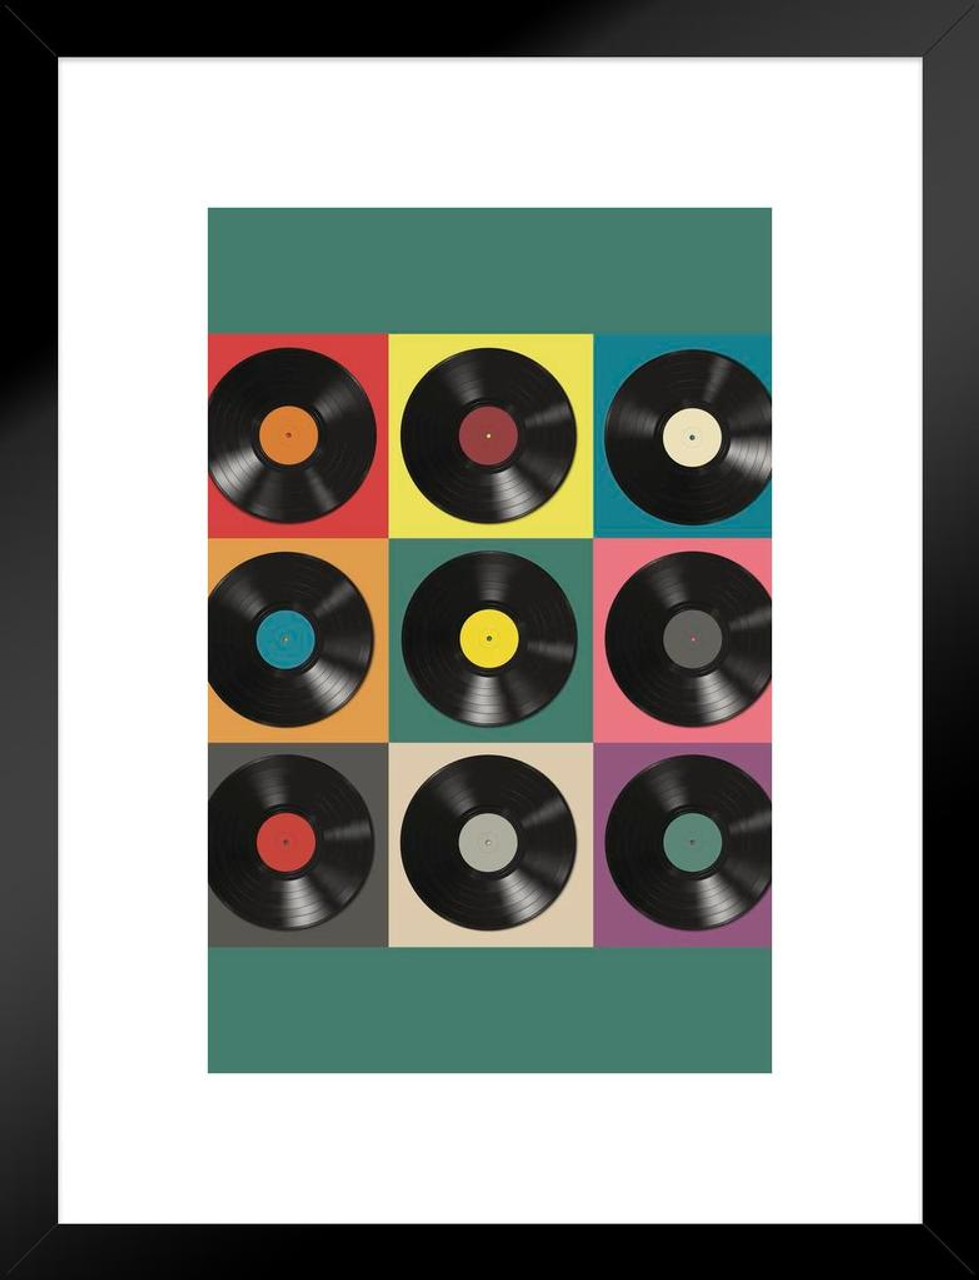 Vinyl Records Pop Matted Framed Art Print Wall Decor 20x26 inch - Poster  Foundry